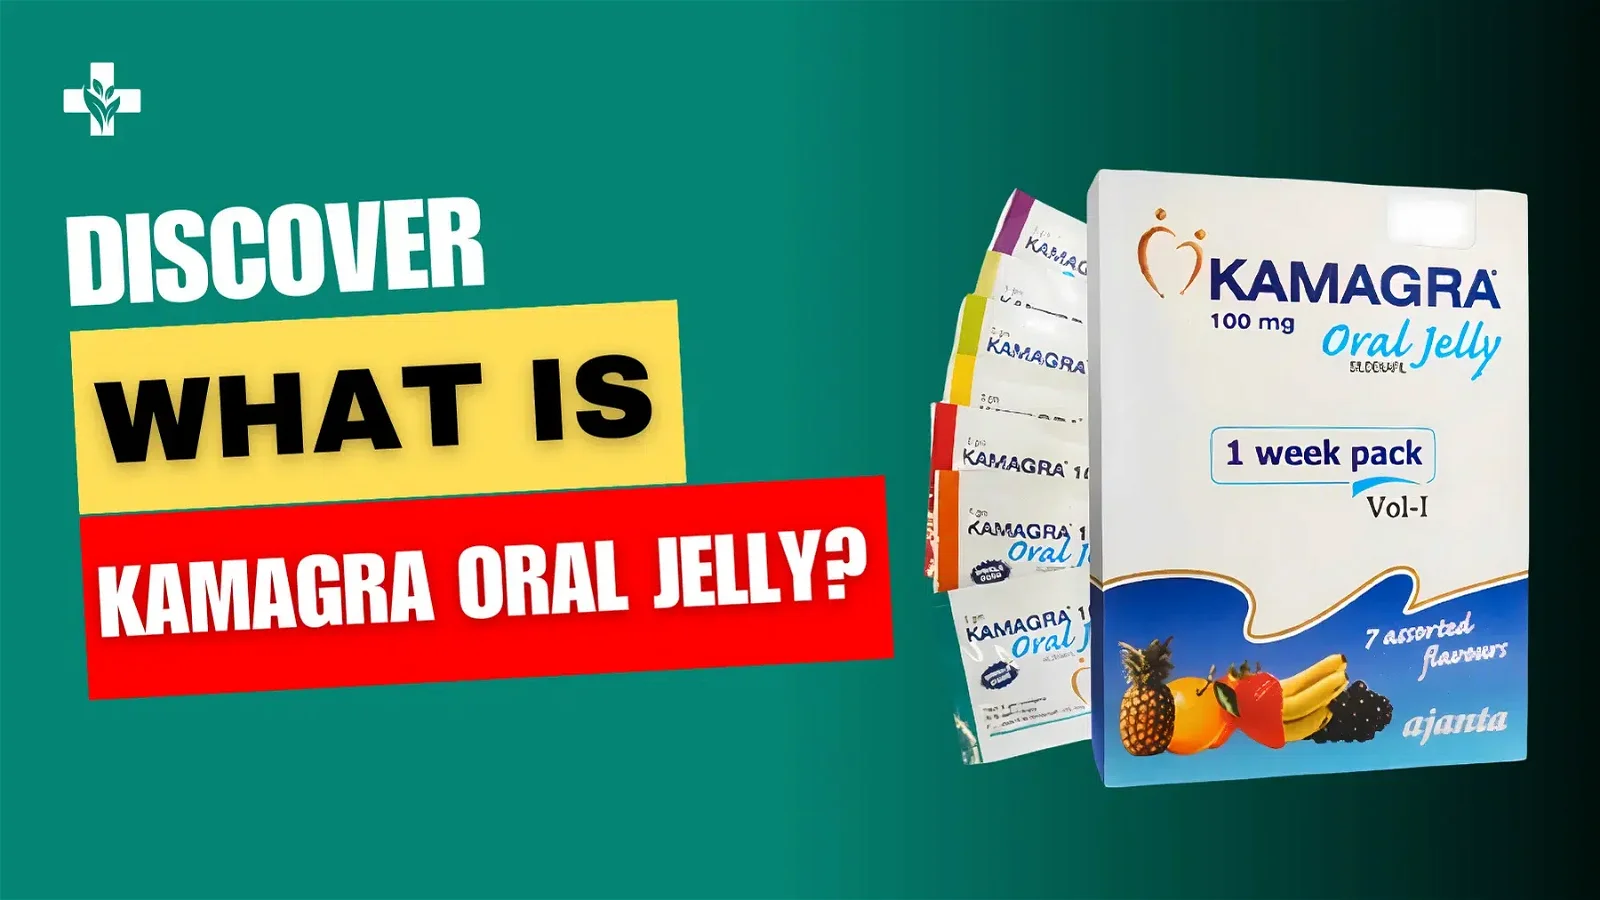 Kamagra Oral Jelly Convenient weekly package for ED treatment